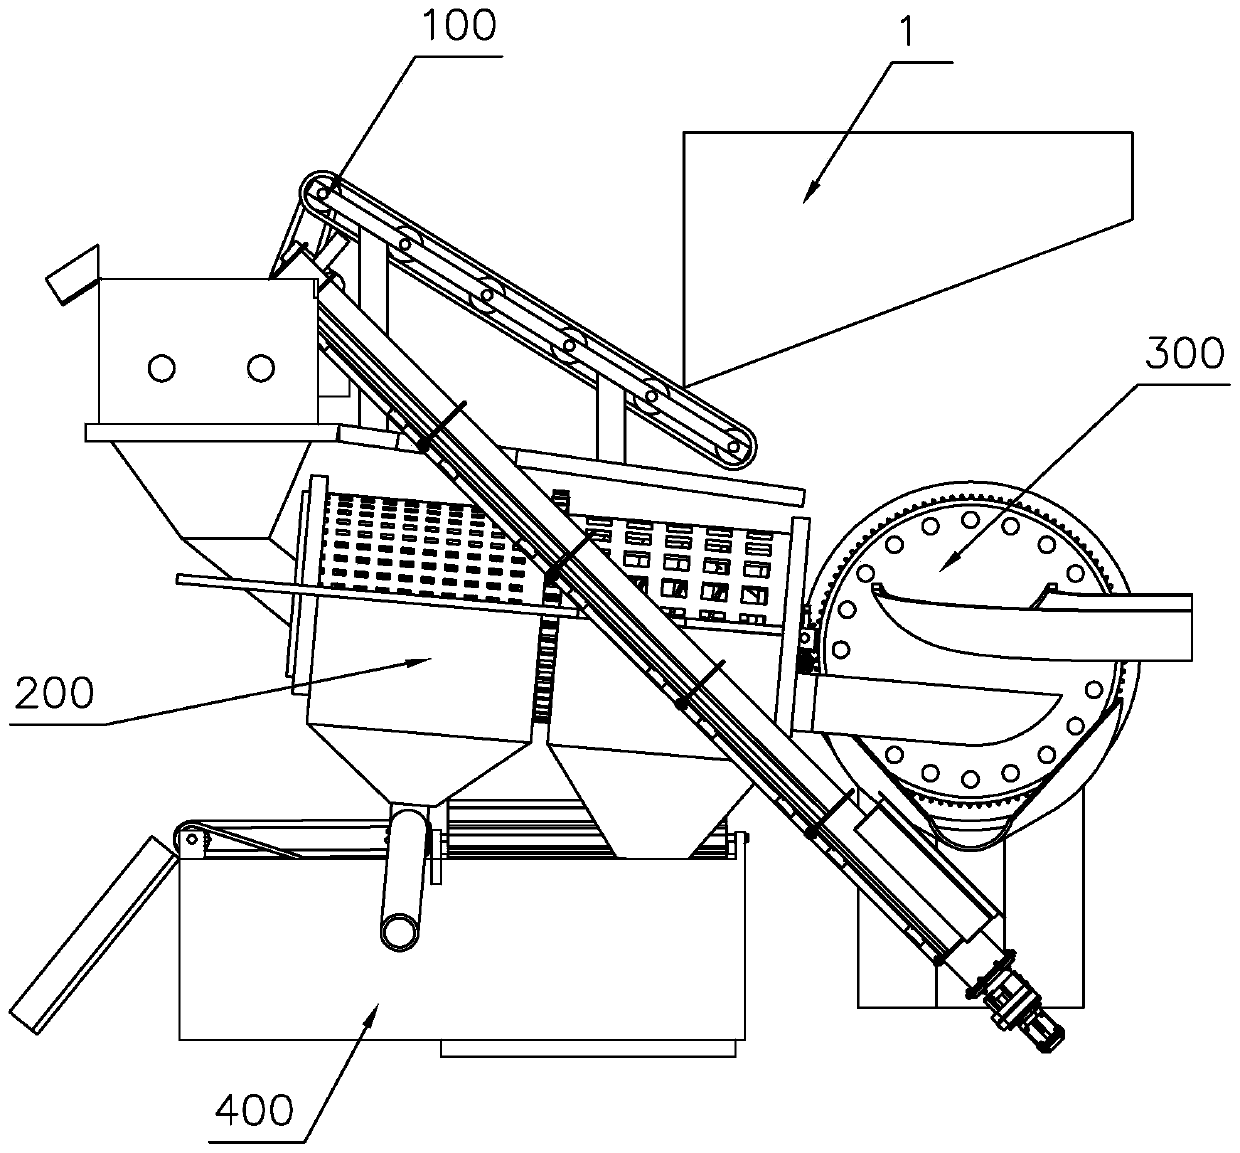 Building rubbish crushing and separating device